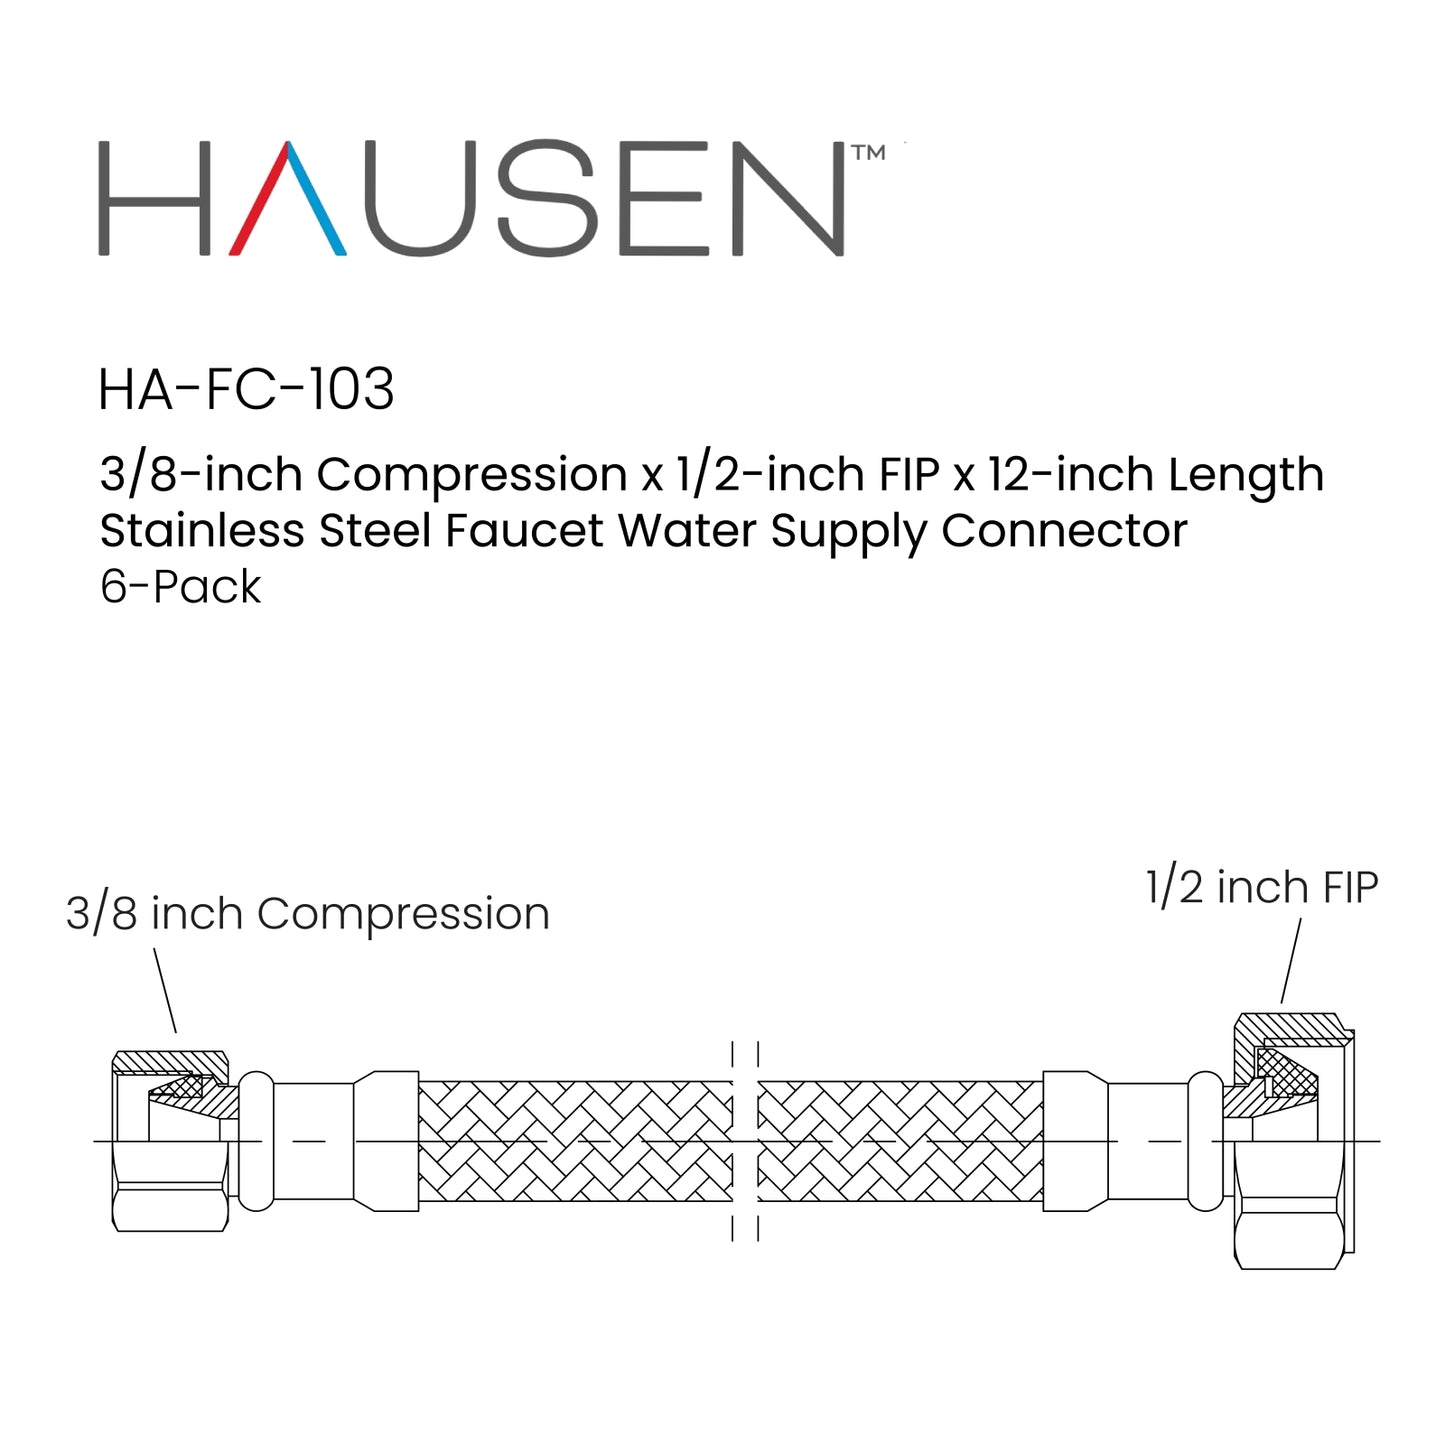 Hausen 3/8-inch Compression x 1/2-inch FIP (Female Iron Pipe) x 12-inch Length Stainless Steel Faucet Water Supply Connector; Lead Free; cUPC and NSF-61 Certified; Compatible with Standard Faucets, 6-Pack